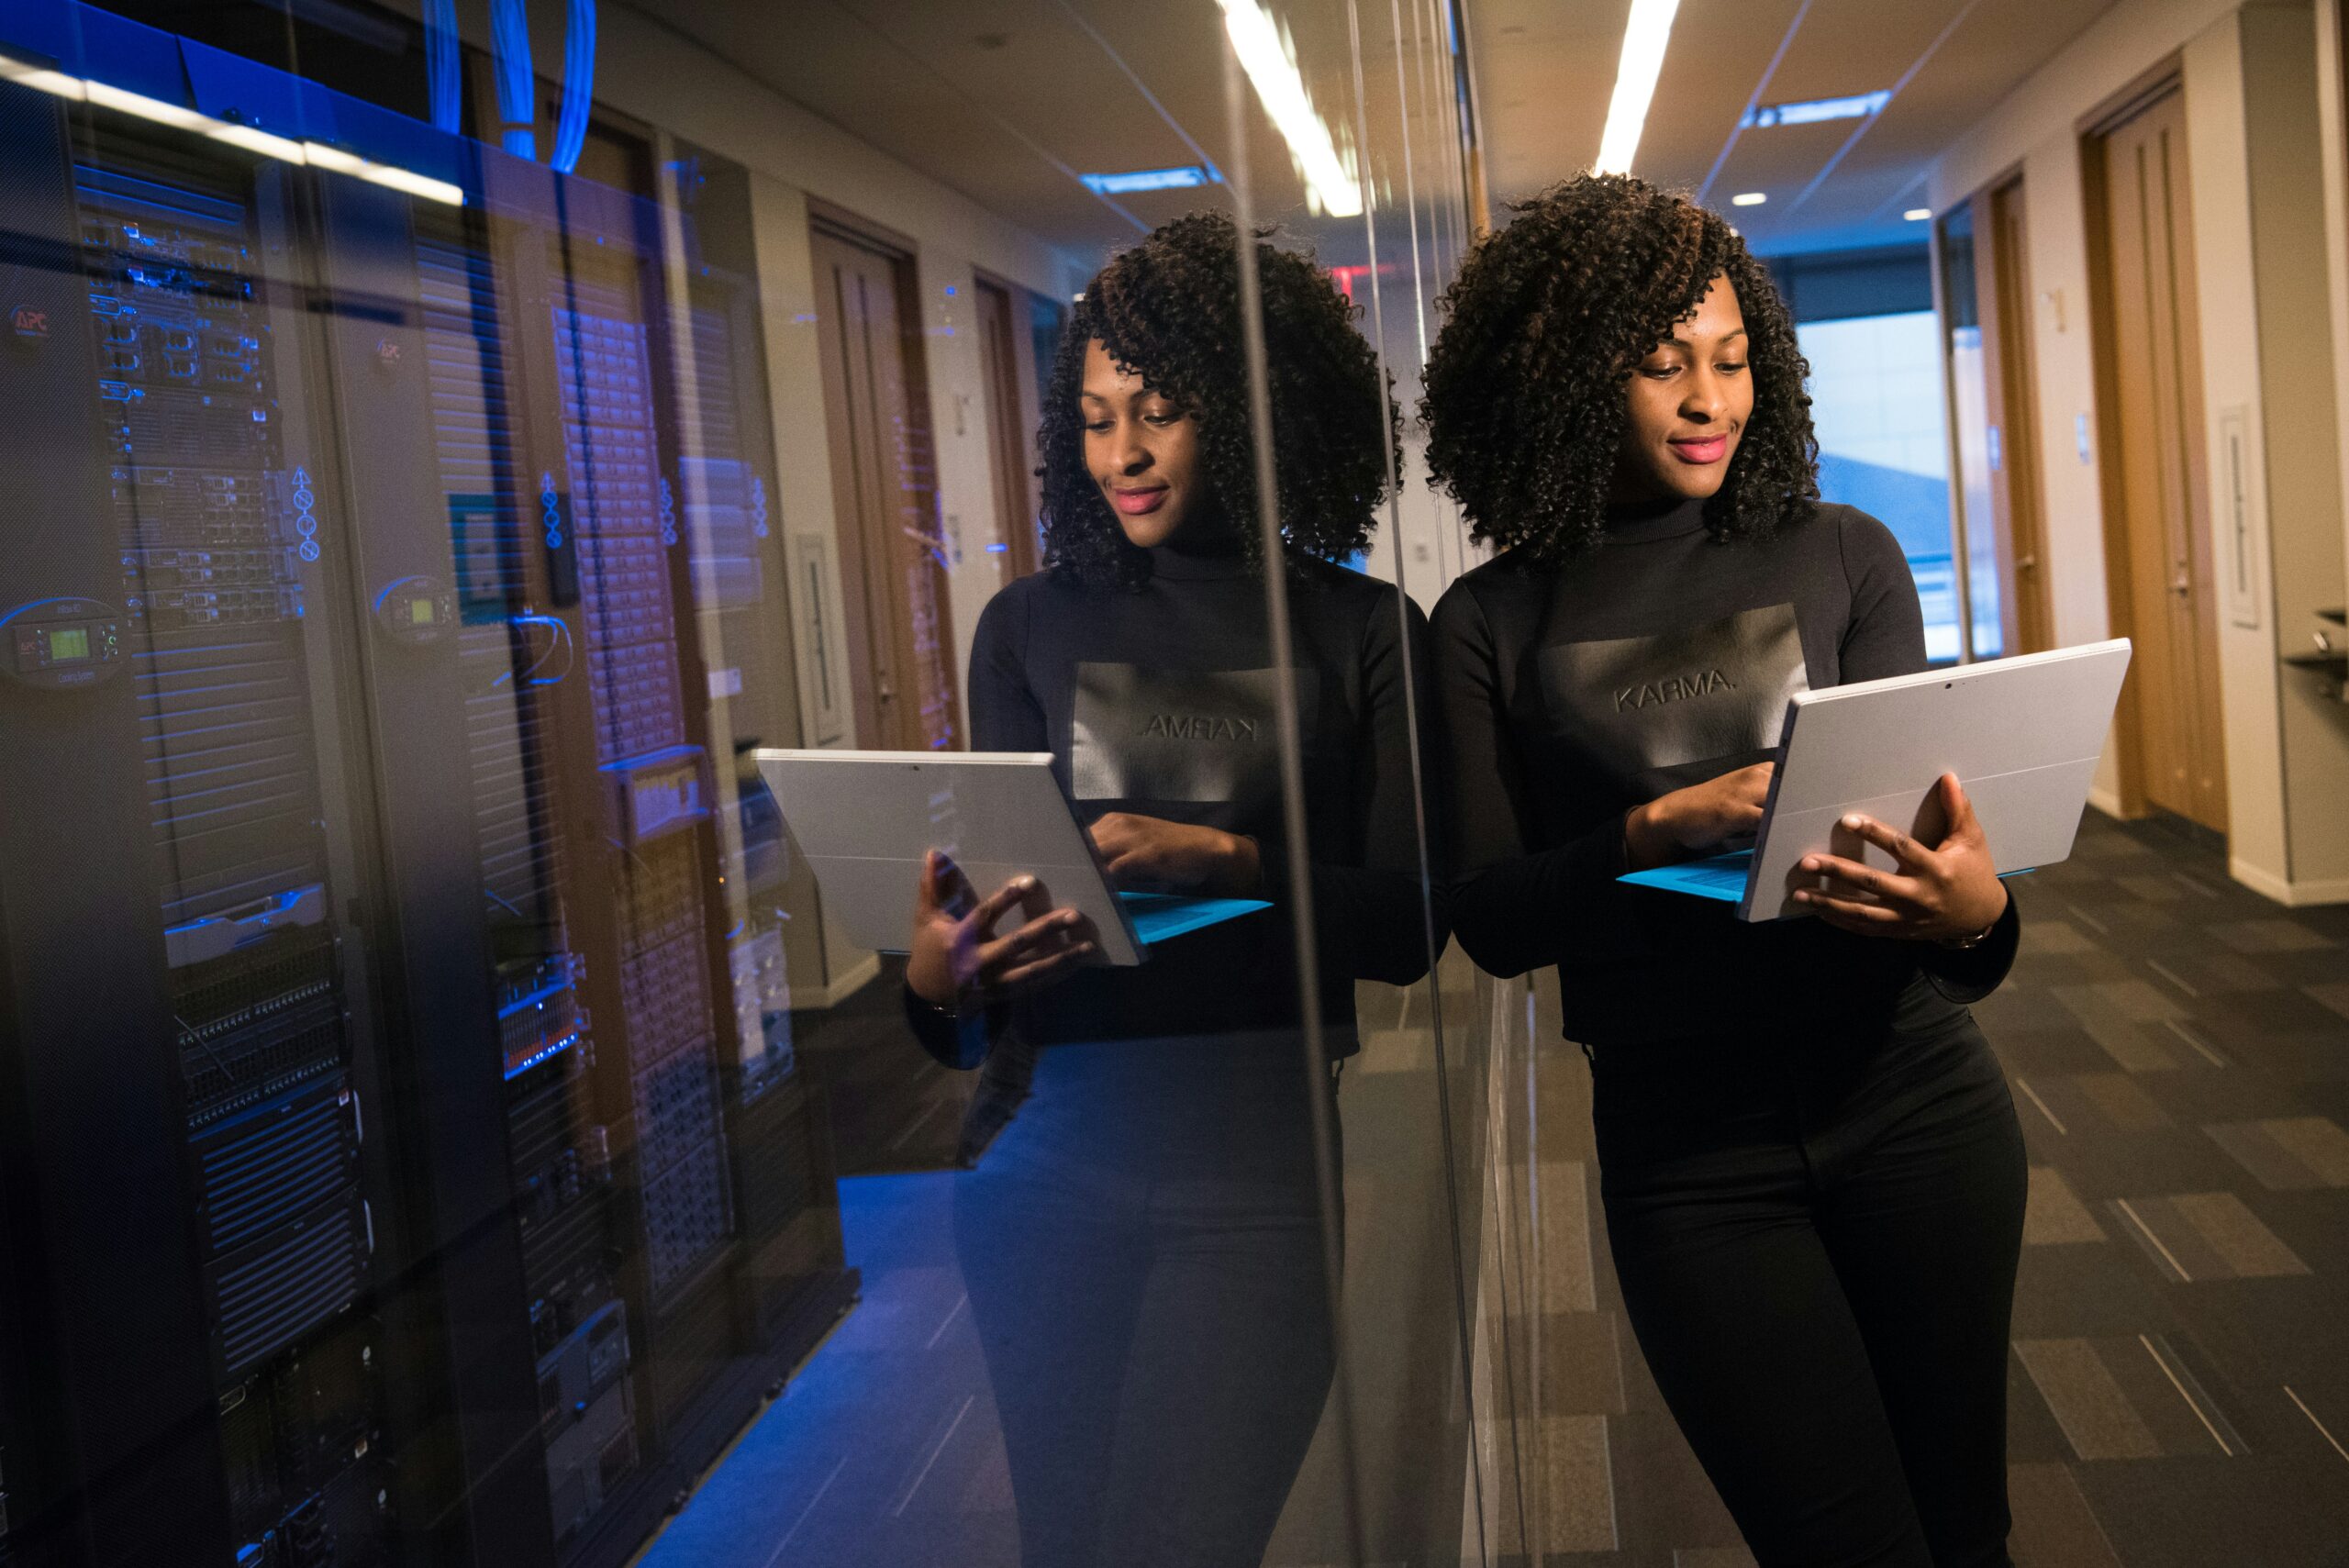 A woman in a black turtleneck checks a tablet for insights on why tech consulting is essential while standing beside a glass wall reflecting her image, in a server room.